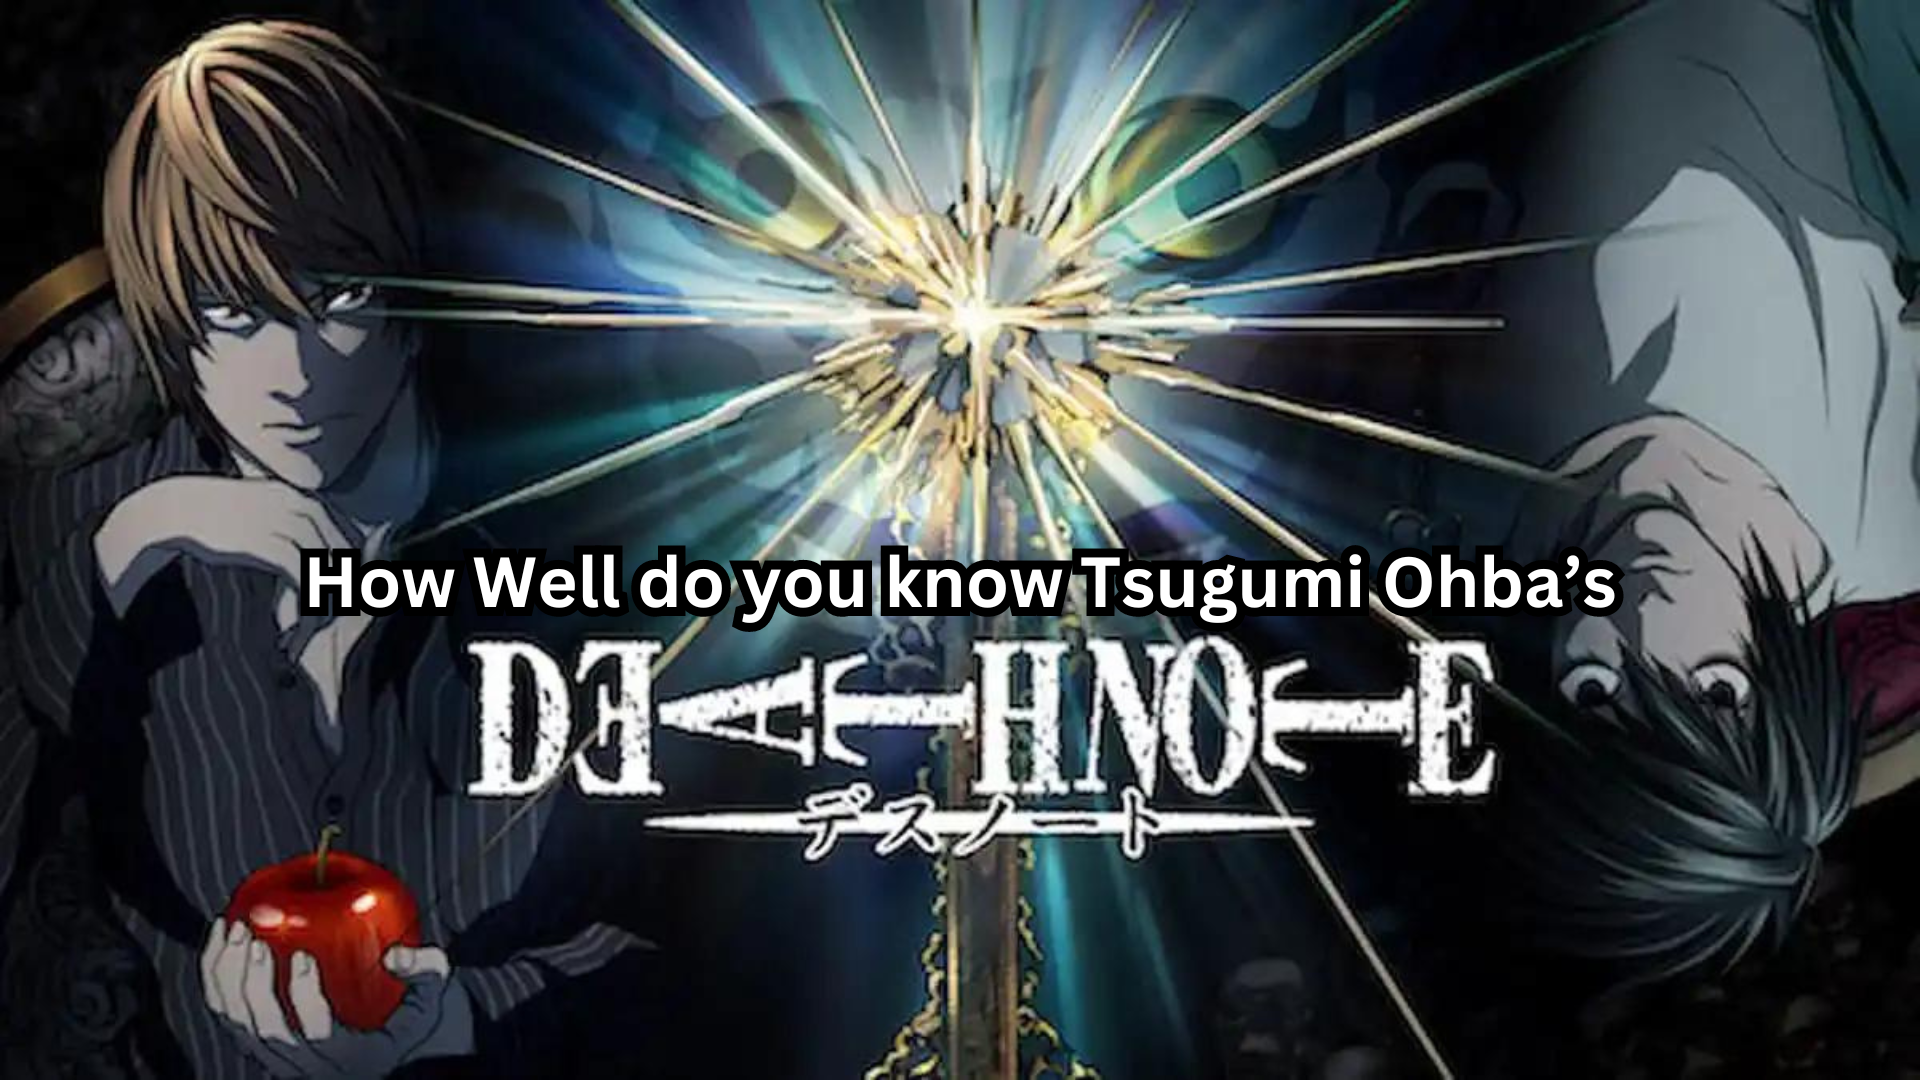 How well do you know Tsugumi Ohba's Death Note?